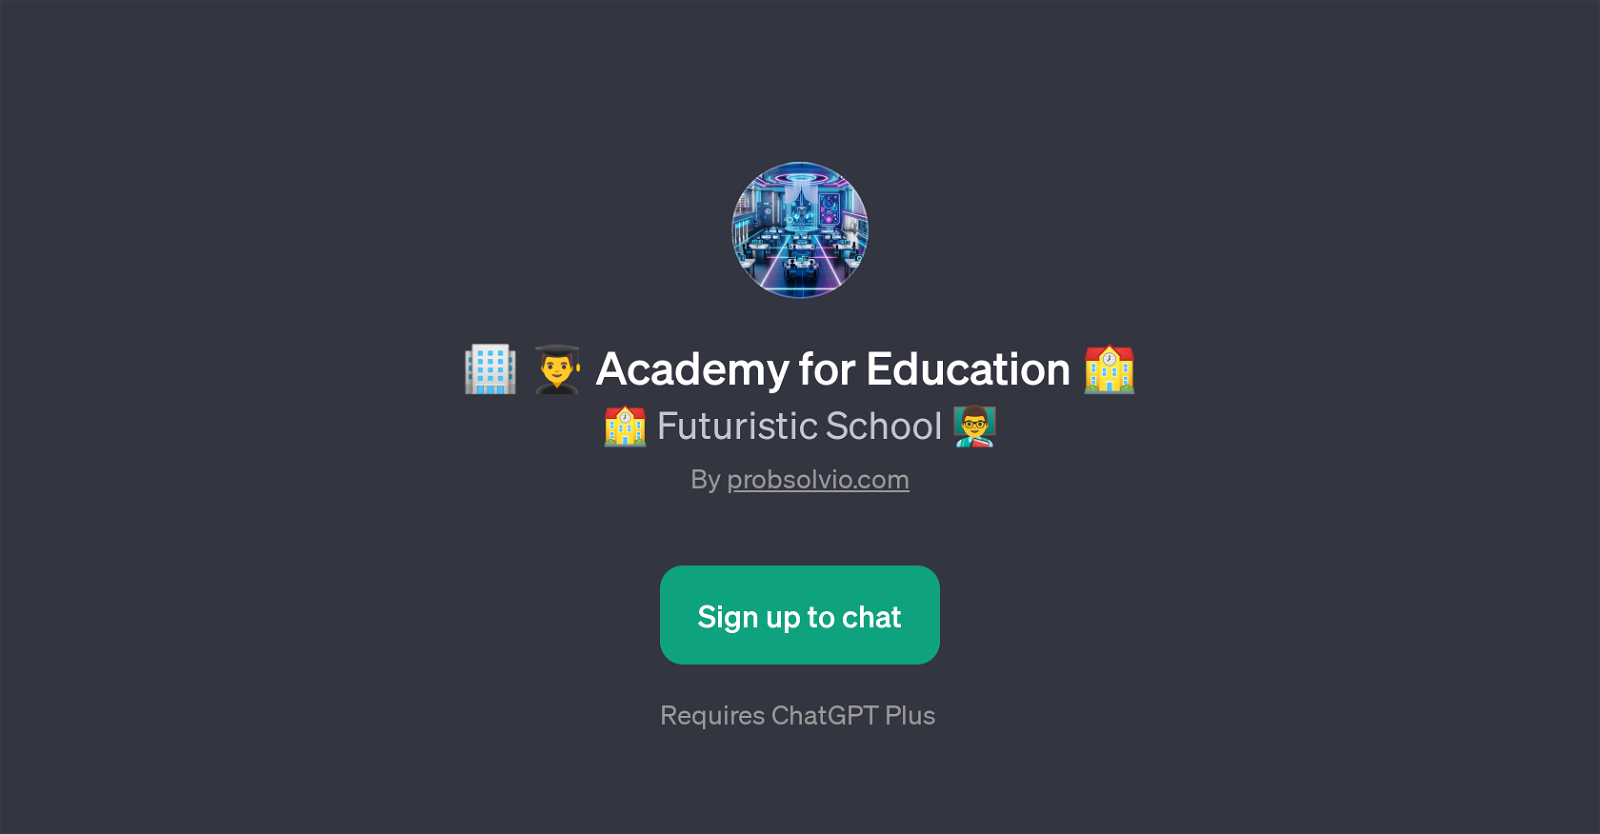 Academy for Education website